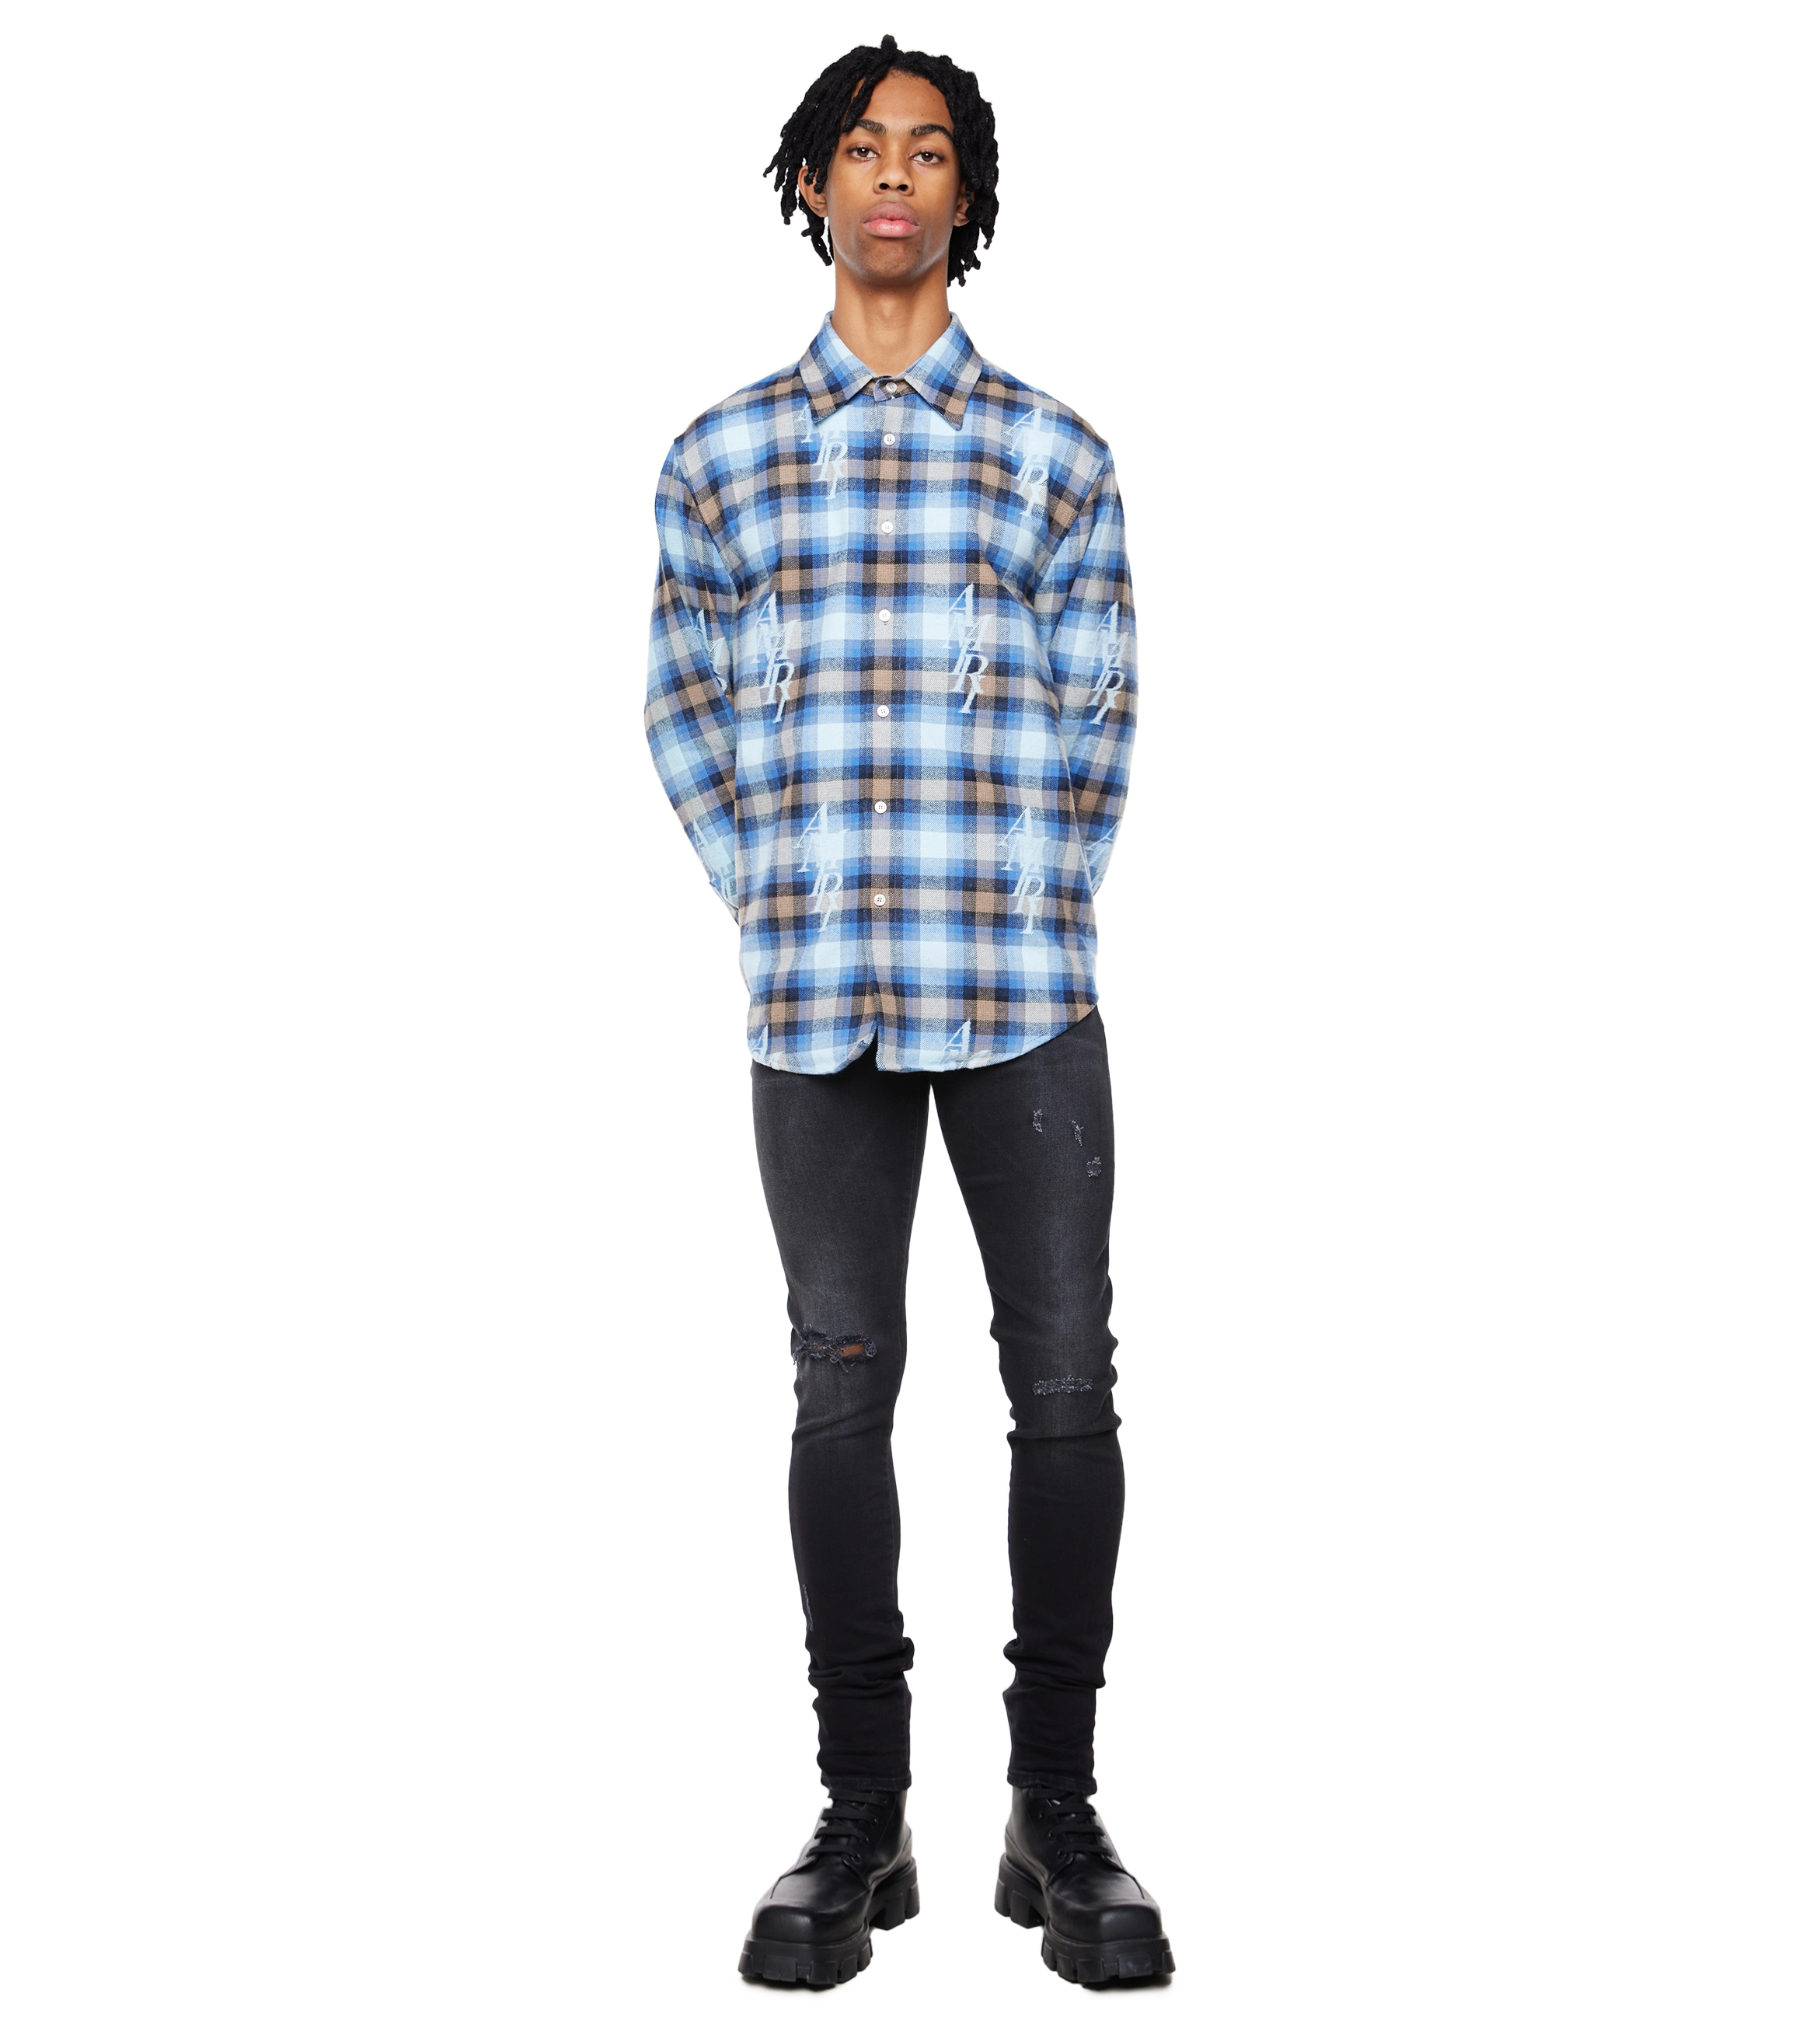 Staggered Plaid Flannel Blue